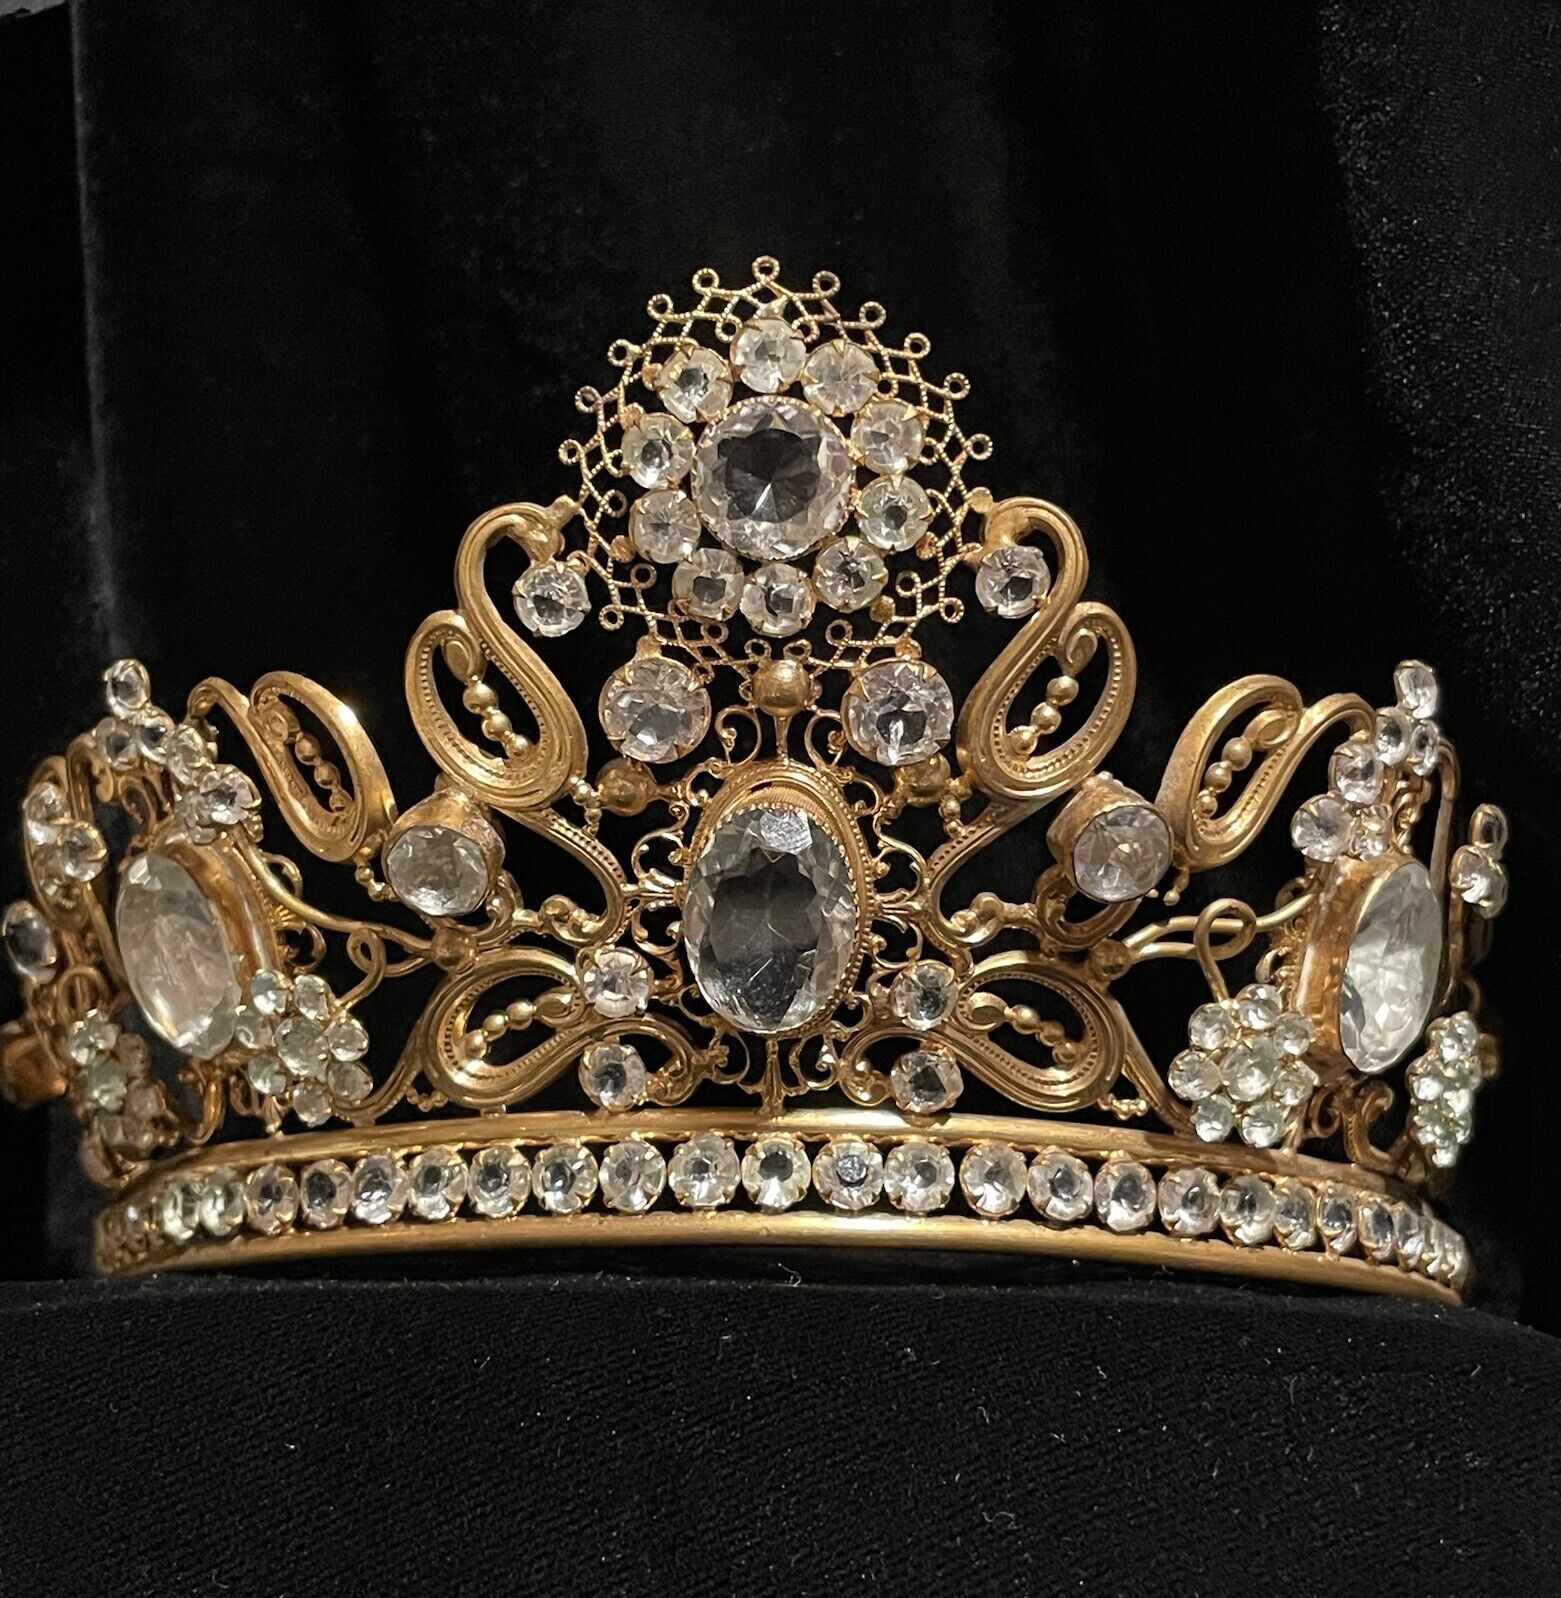 Antique Large French Religious Bejeweled Brass Tiara Crown